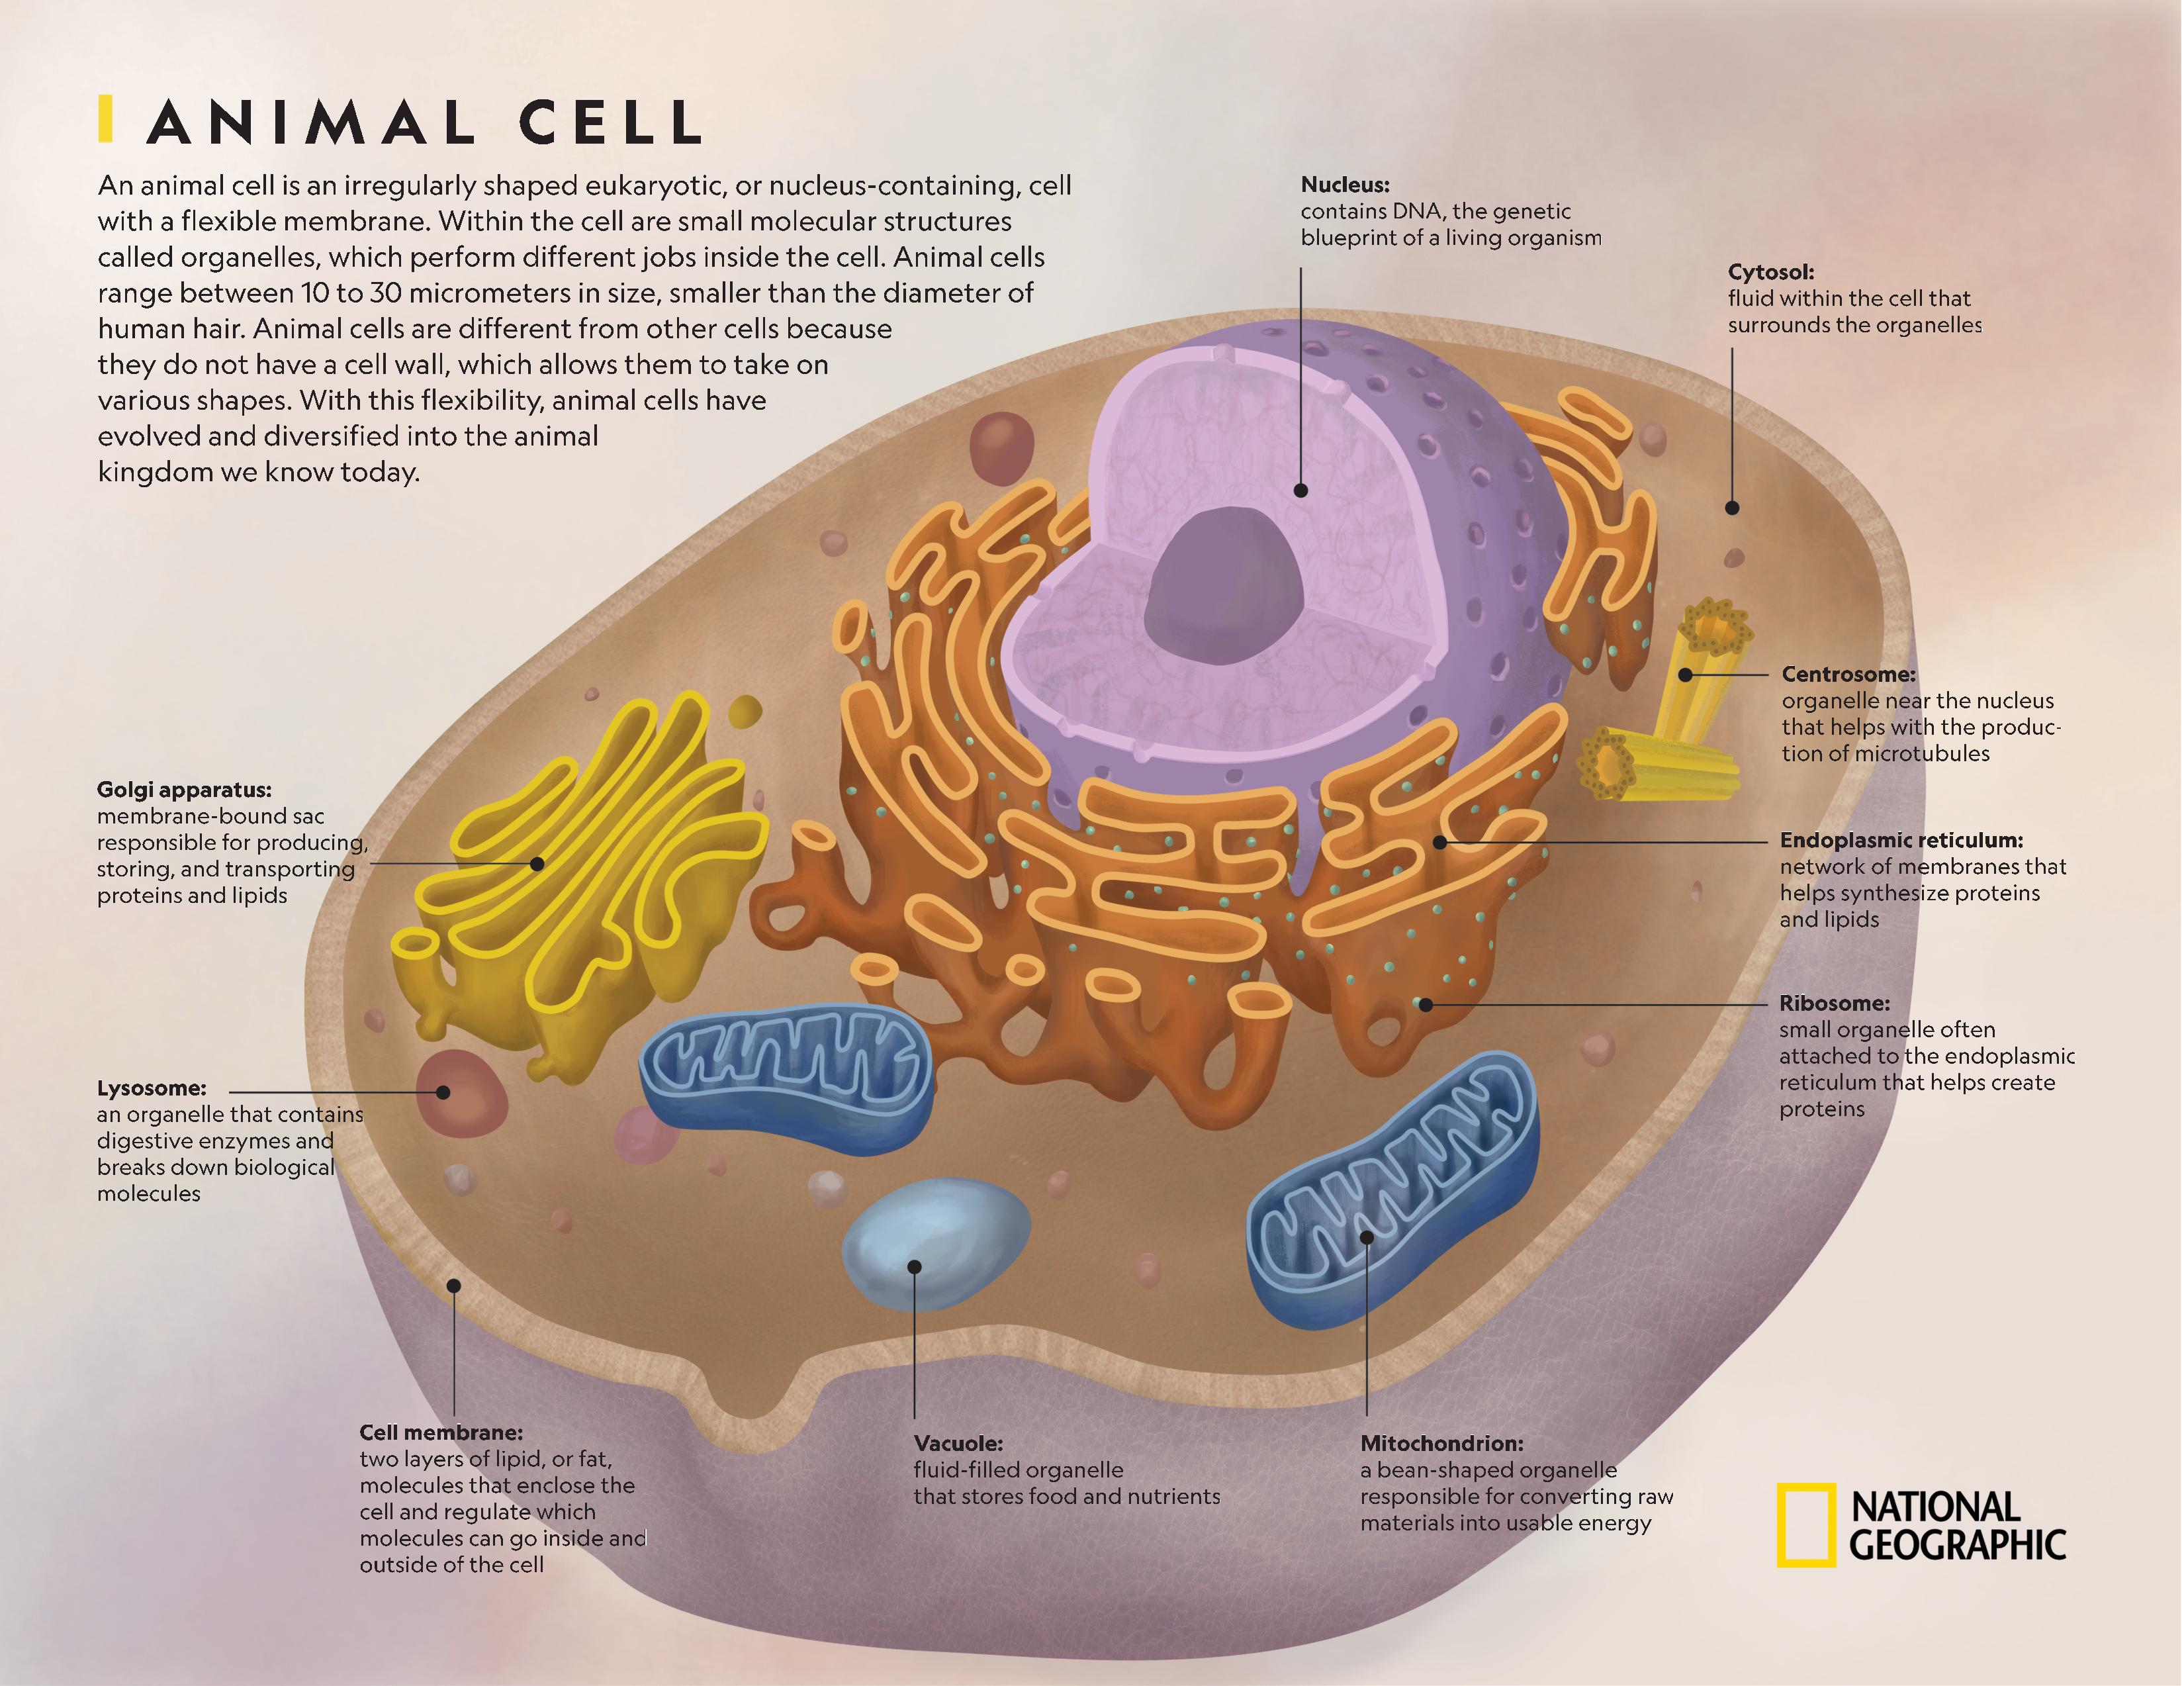 History of the Cell: Discovering the Cell